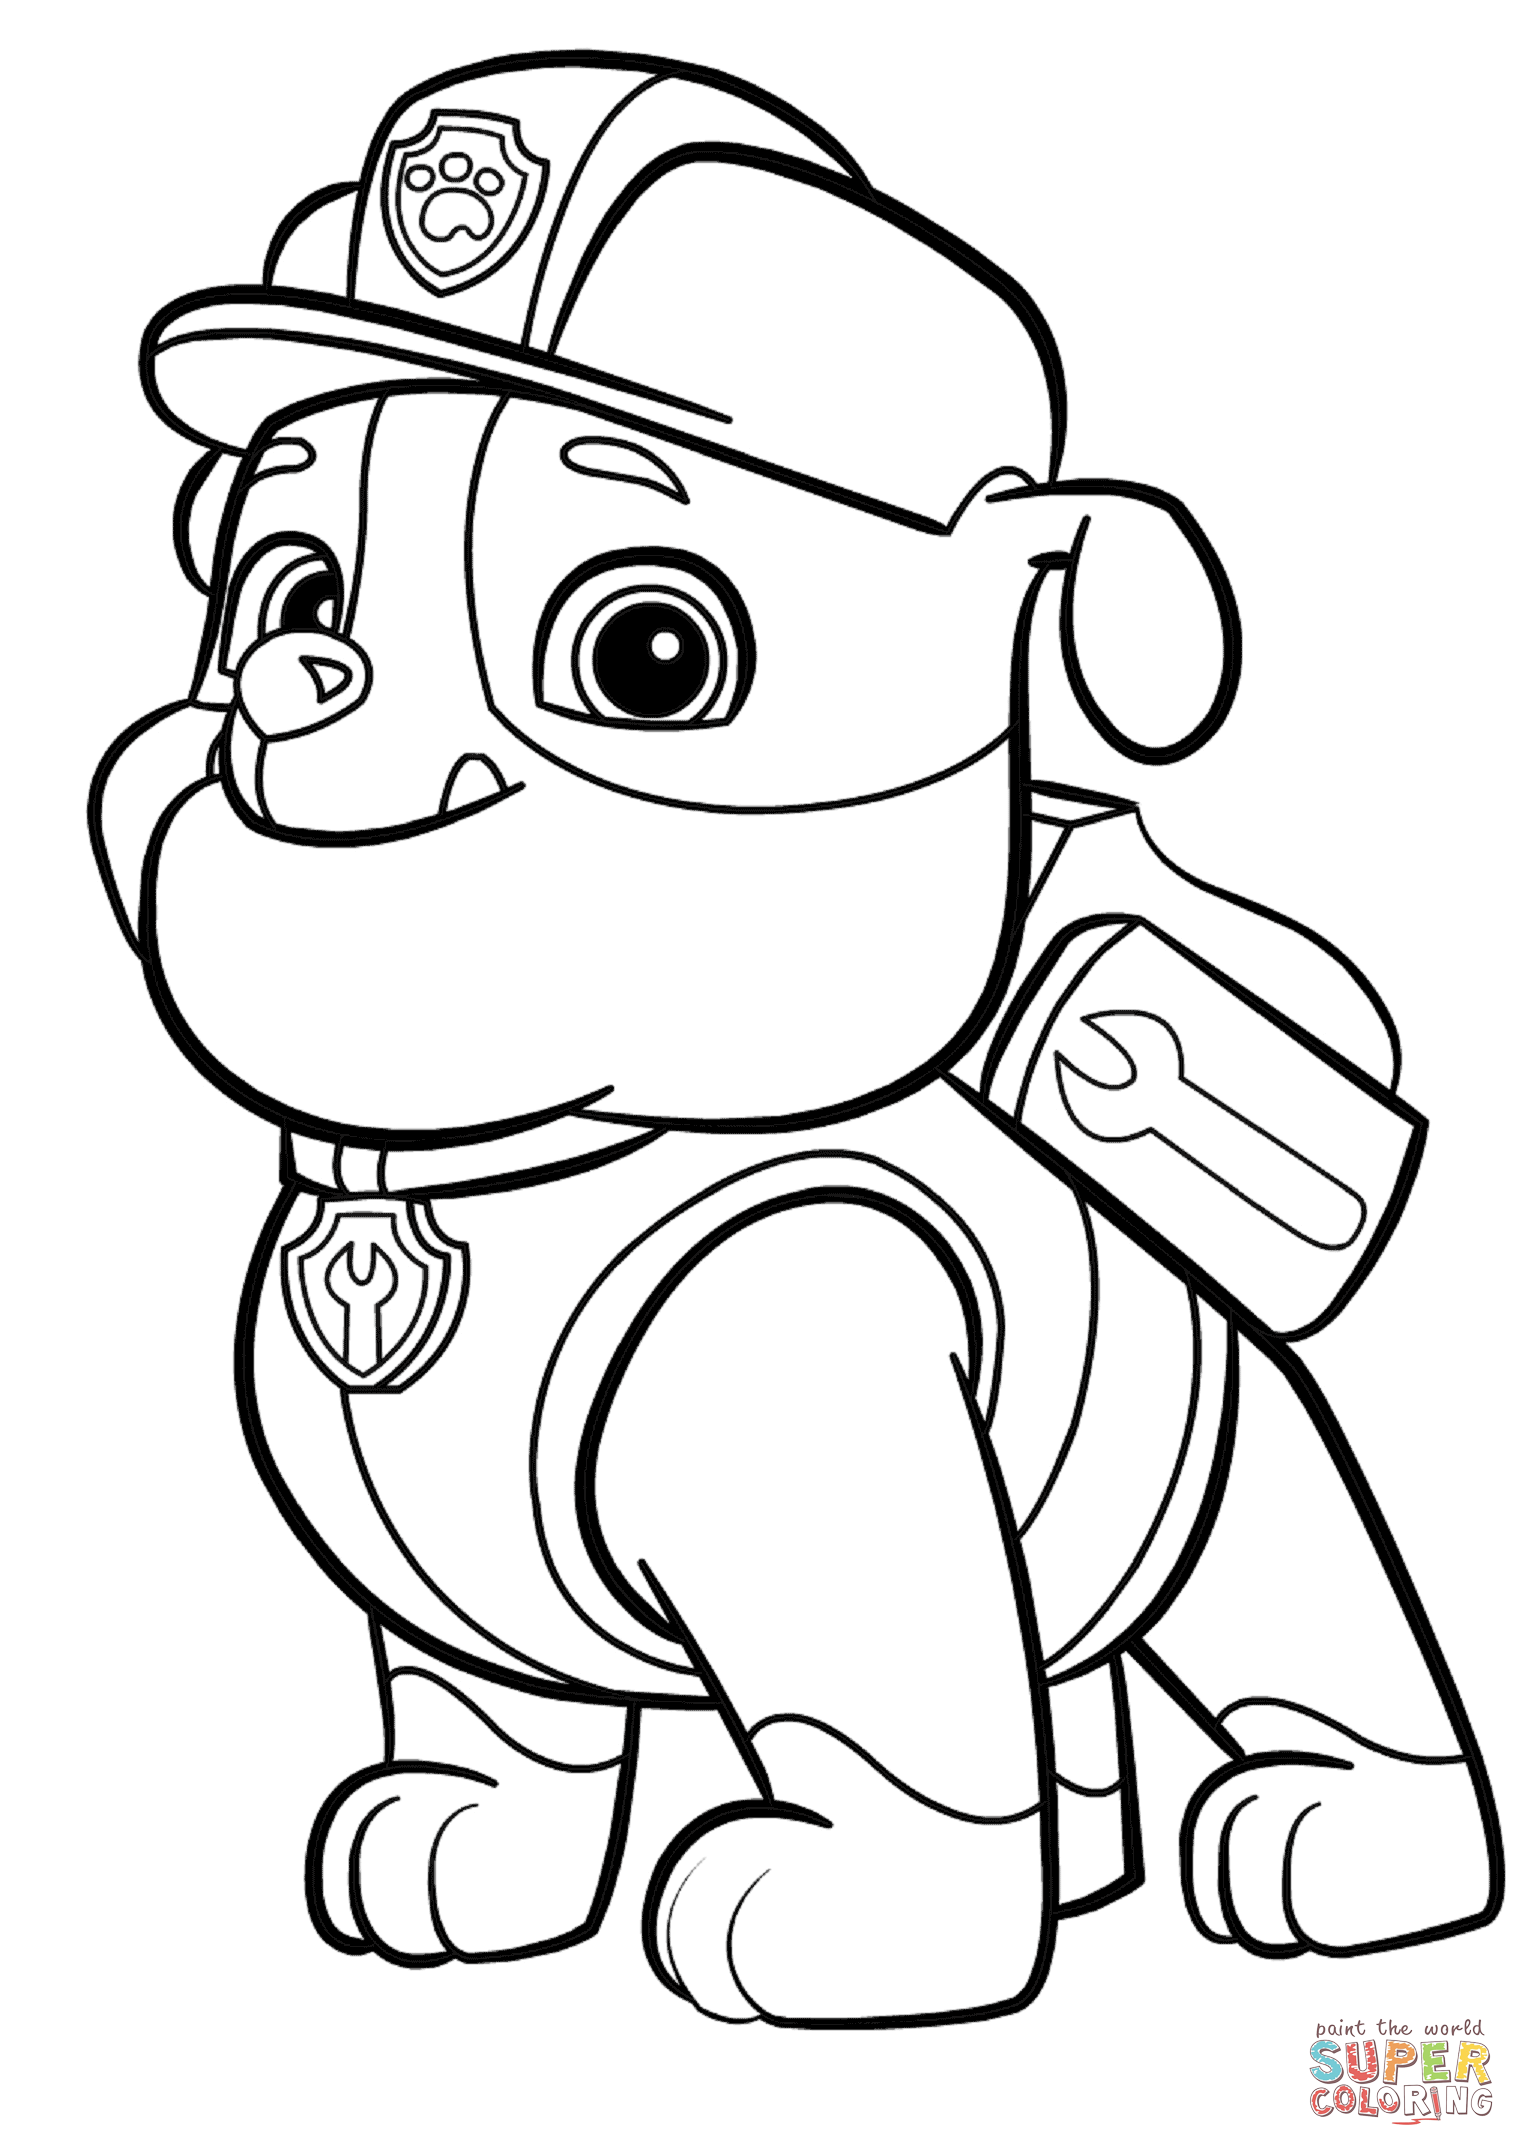 Paw patrol rubble coloring page free printable coloring pages